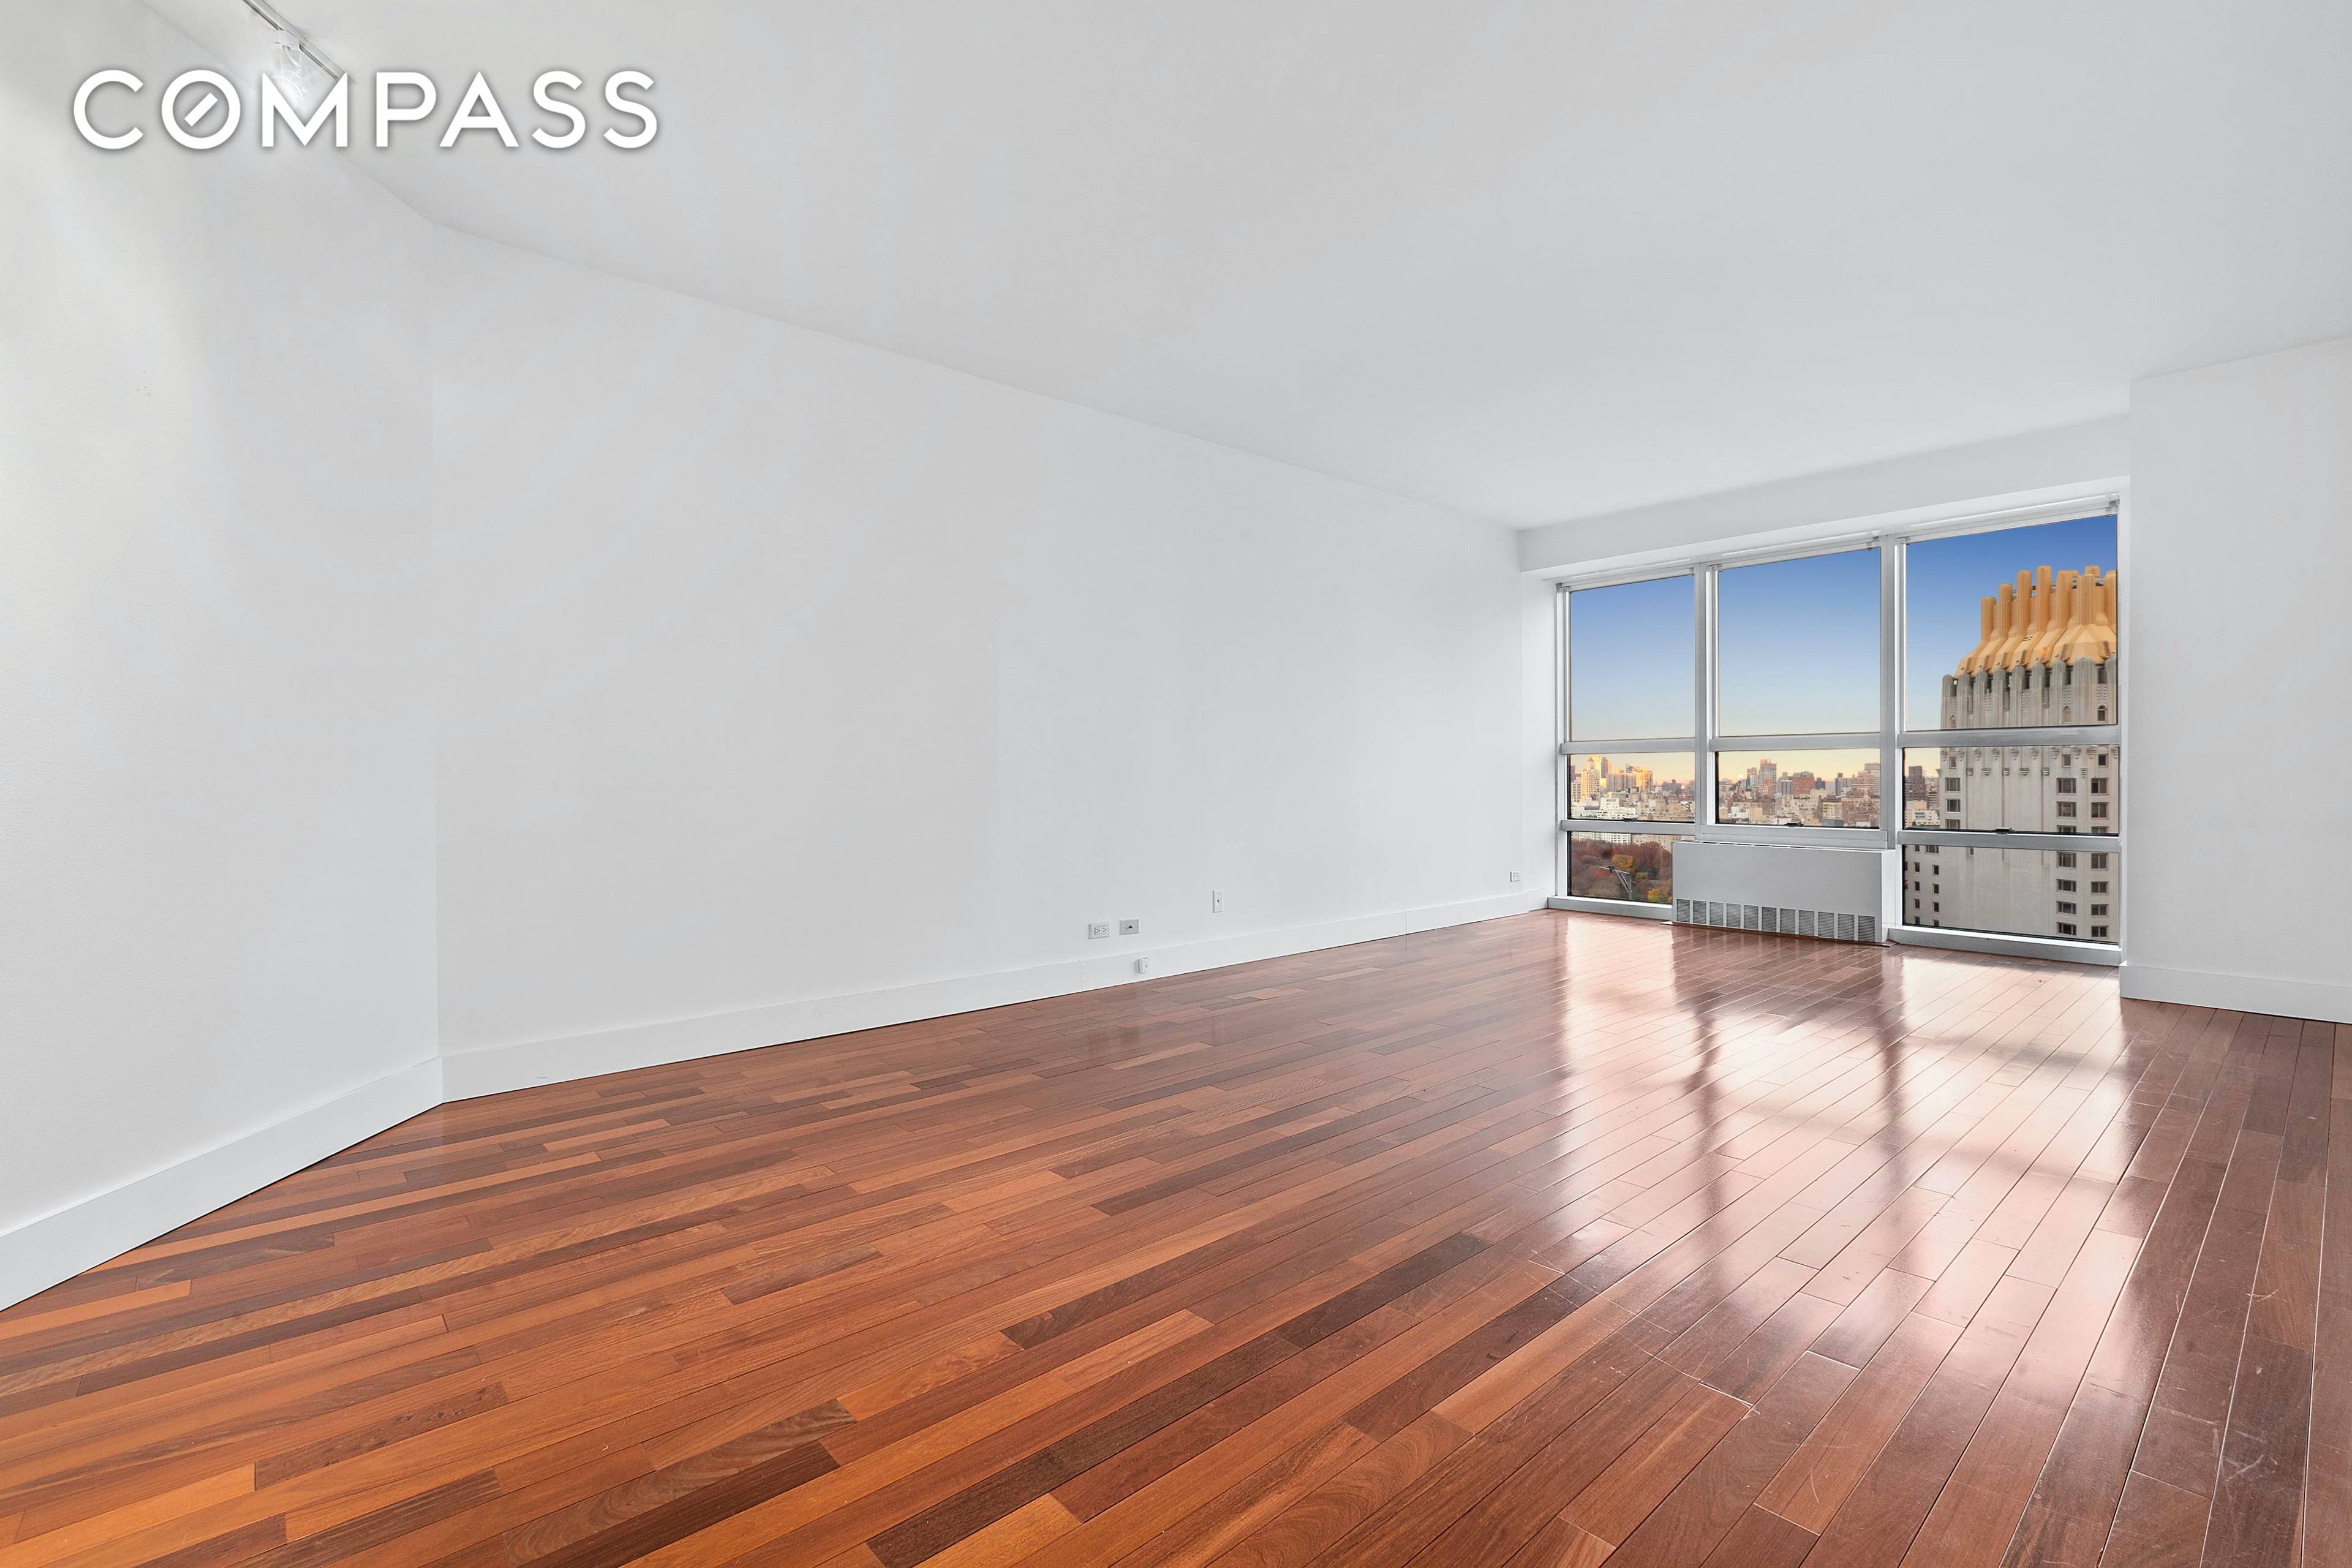 Spectacular Central Park Views from this unique and X Large 1 bedroom located in iconic Metropolitan Tower Condominium.